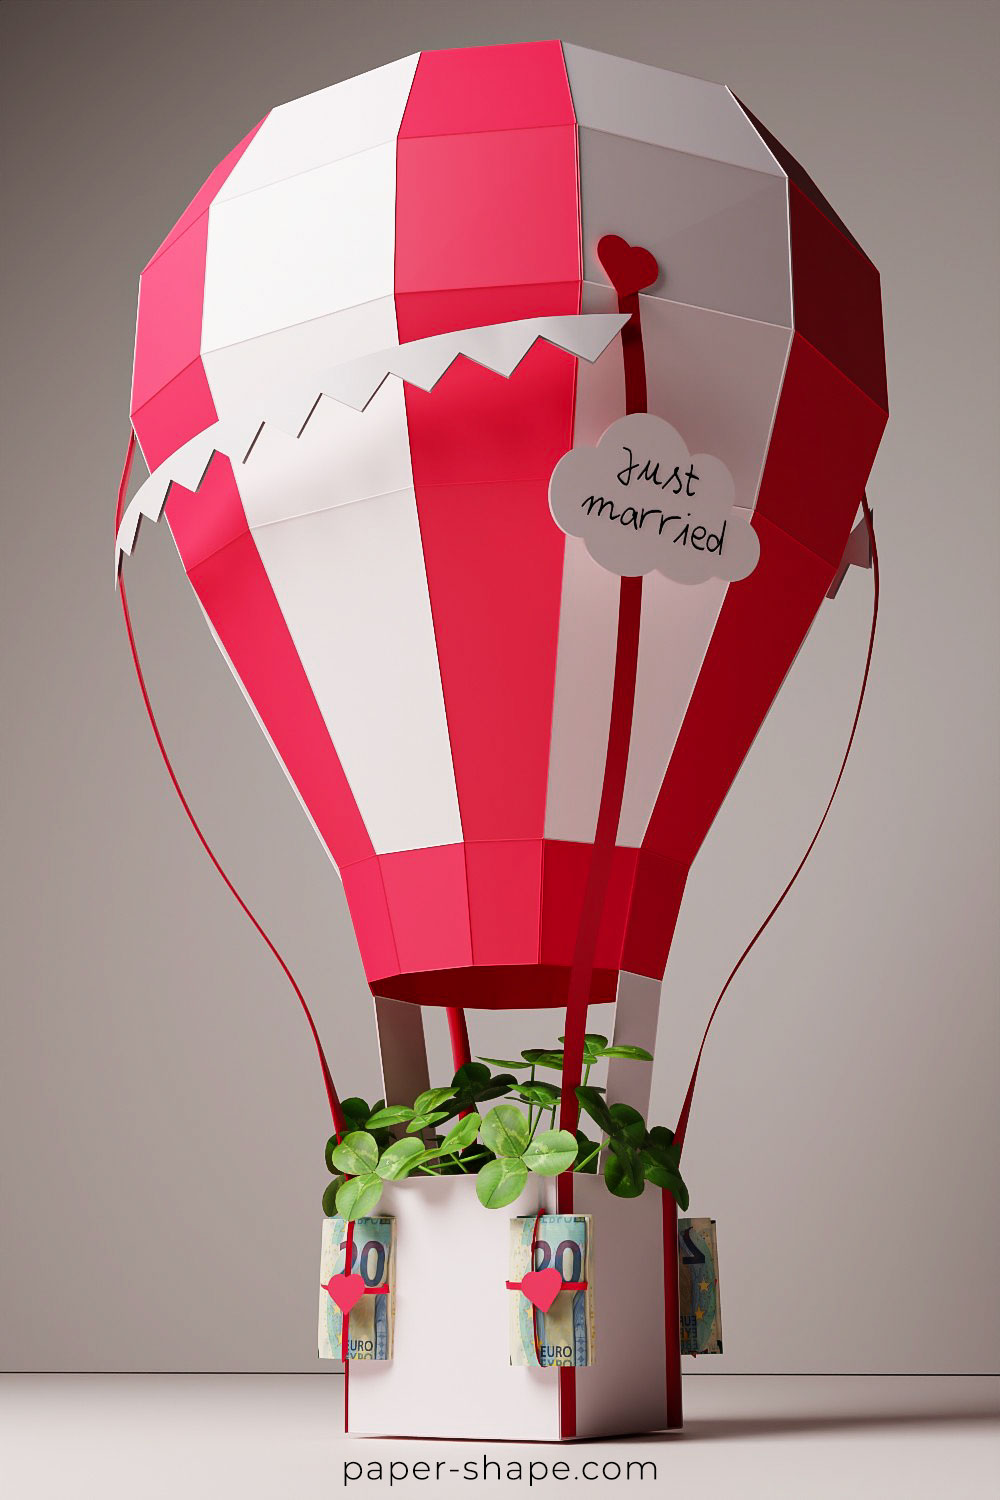 Homemade red and white hot air balloon made of paper